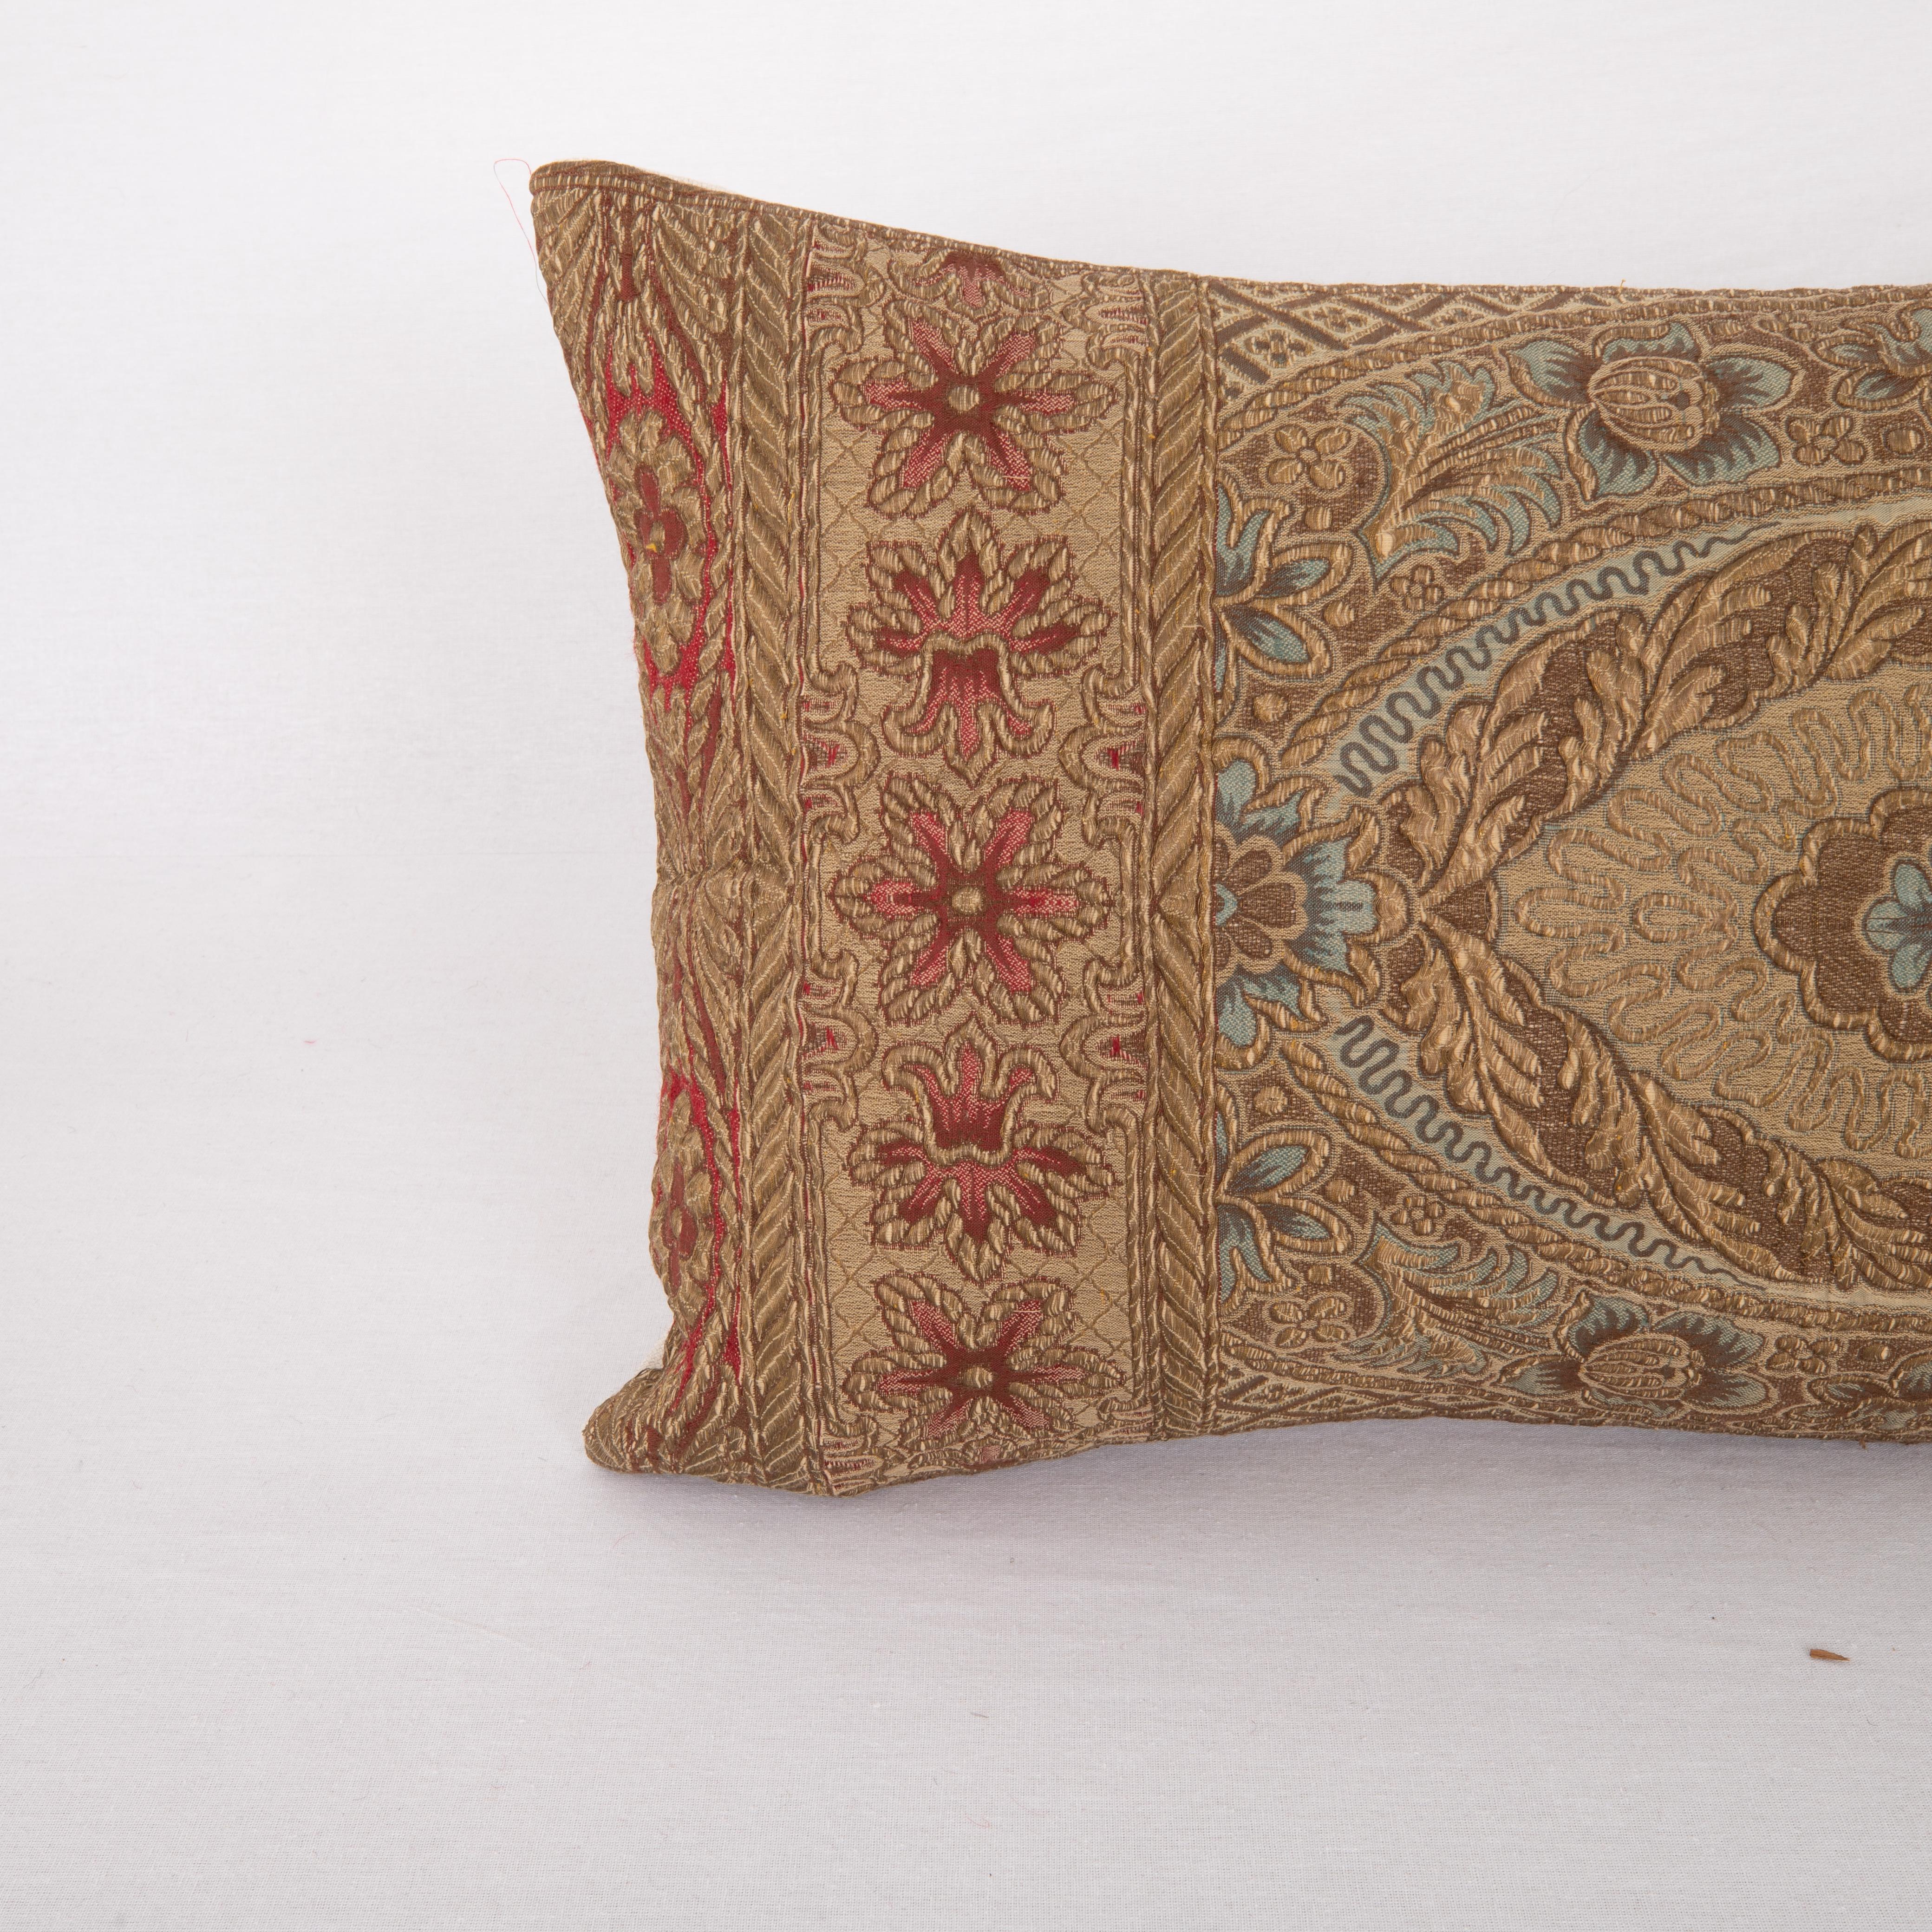 Embroidered Pillow Cover Made from an early 20th C. Italian Embroidery For Sale